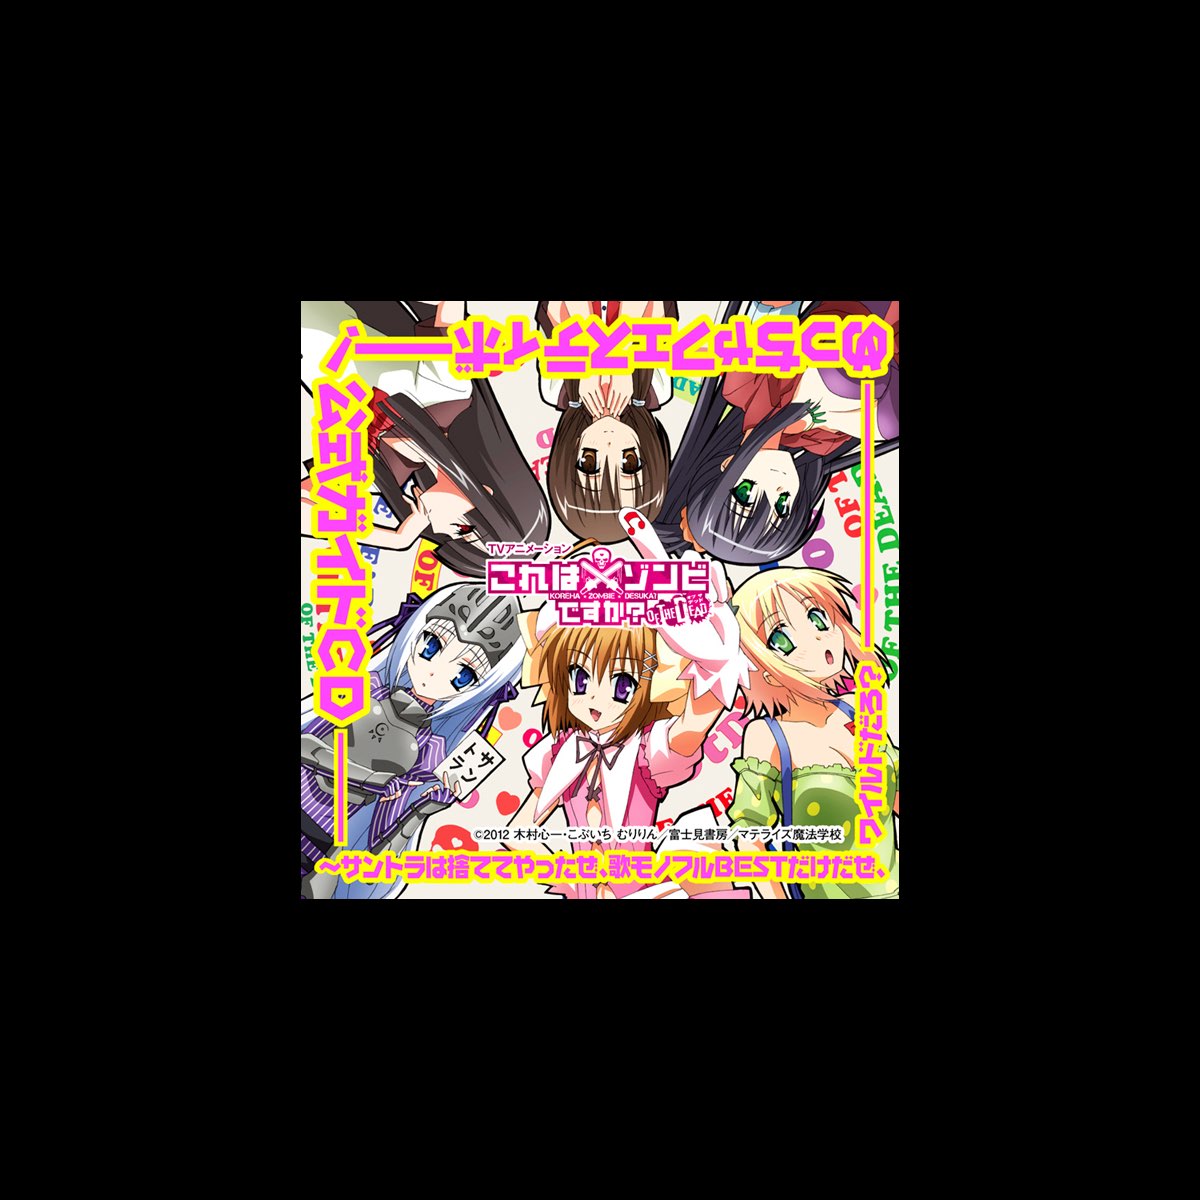 Is This A Zombie Of The Dead Meccha Festivo Official Guide Cd By 野水いおり 山口理恵 柿島伸次 他 On Apple Music